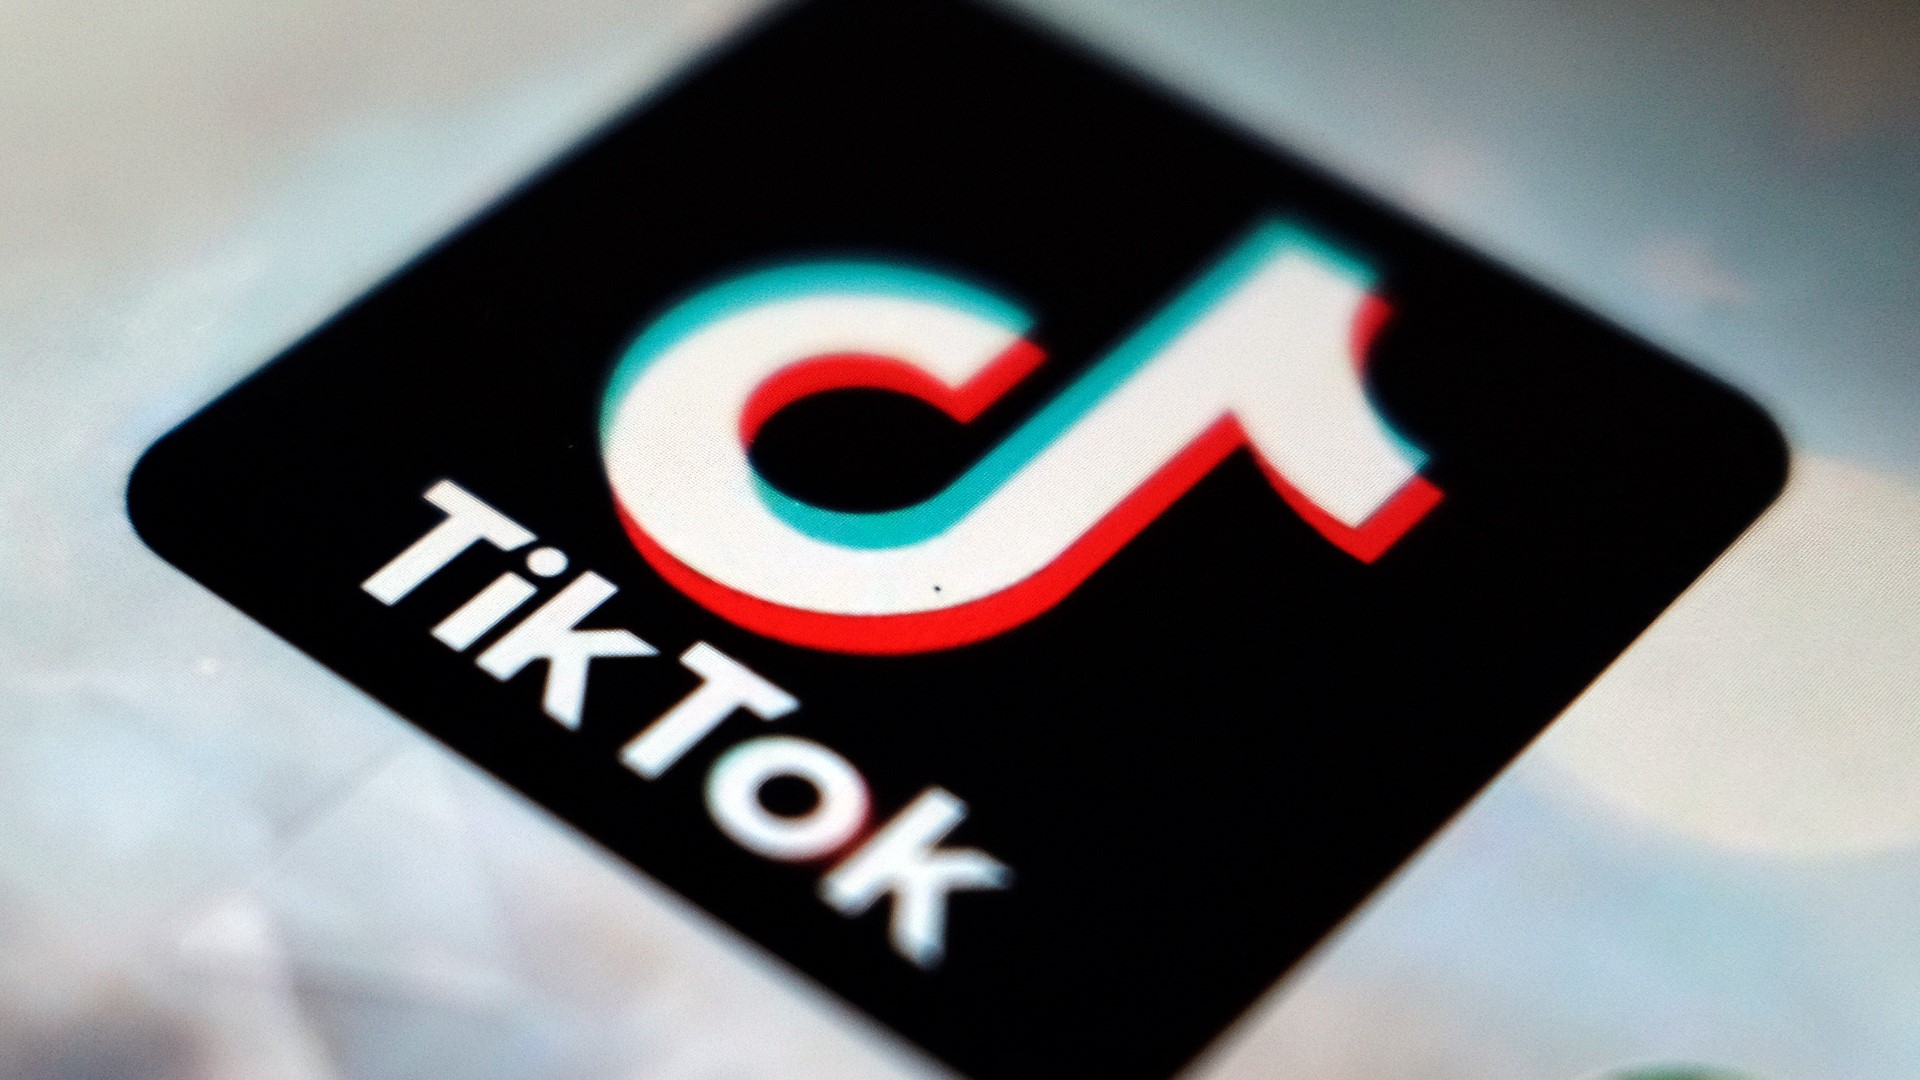 With concerns growing over cybersecurity, congress is looking to ban TikTok from government devices.